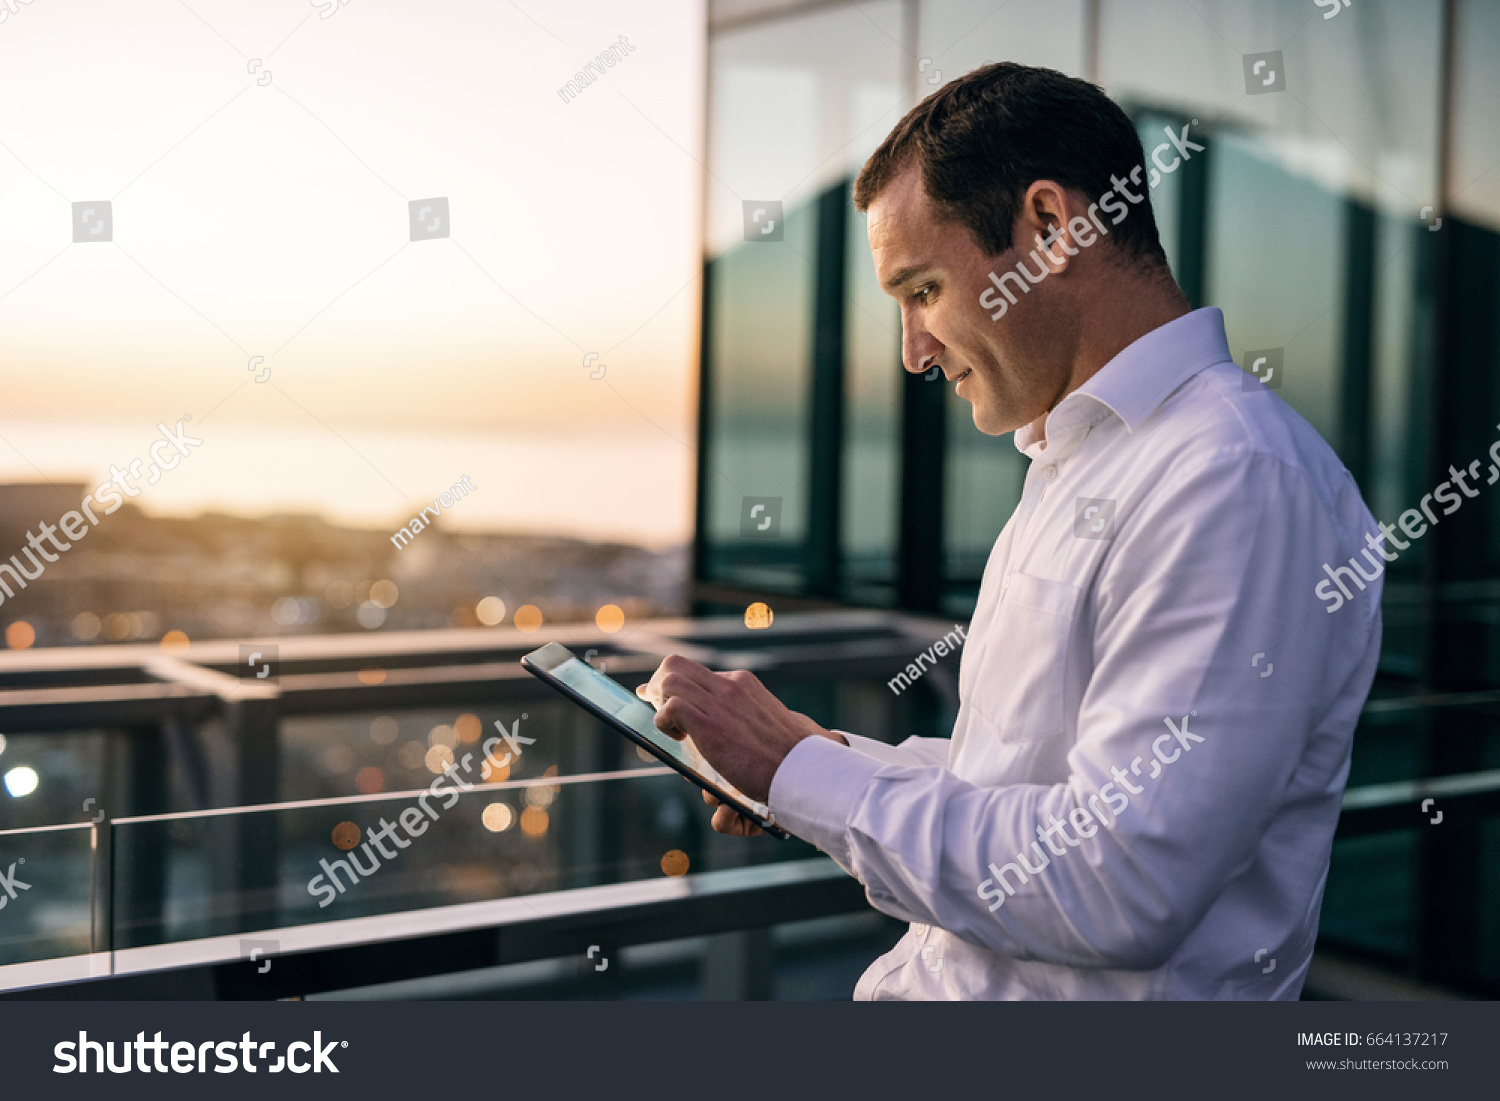 Smiling mature businessman working online with a digital tablet while standing outside on an office building balcony overlooking the city at dusk #664137217